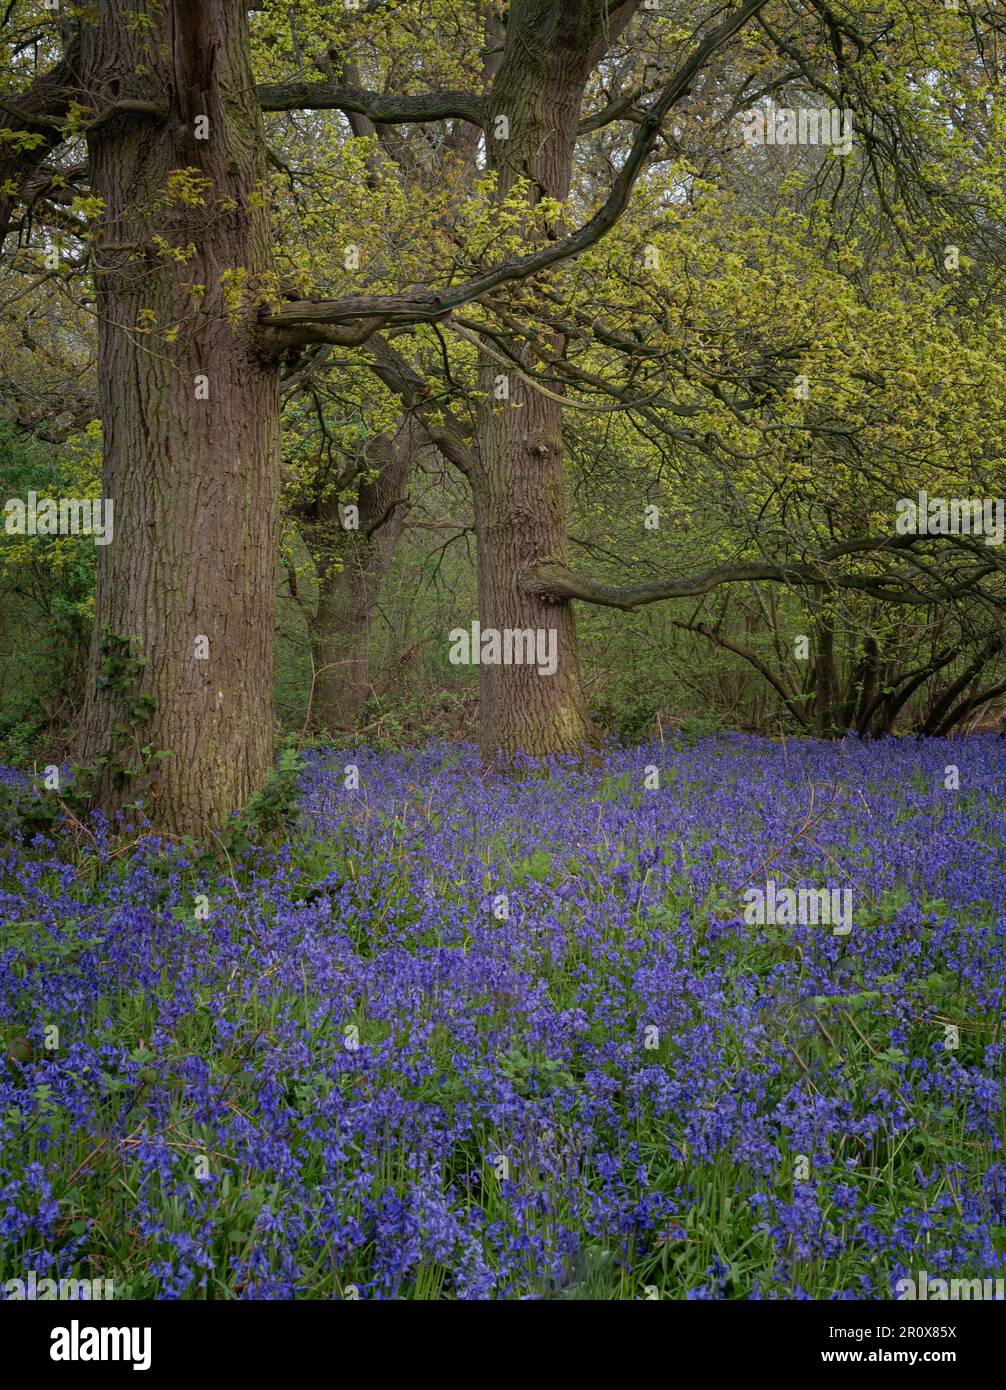 Bulebells in Hillhouse woods in West Bergholt, Essex. Blue, purple flowers, green trees, spring mood. Stock Photo